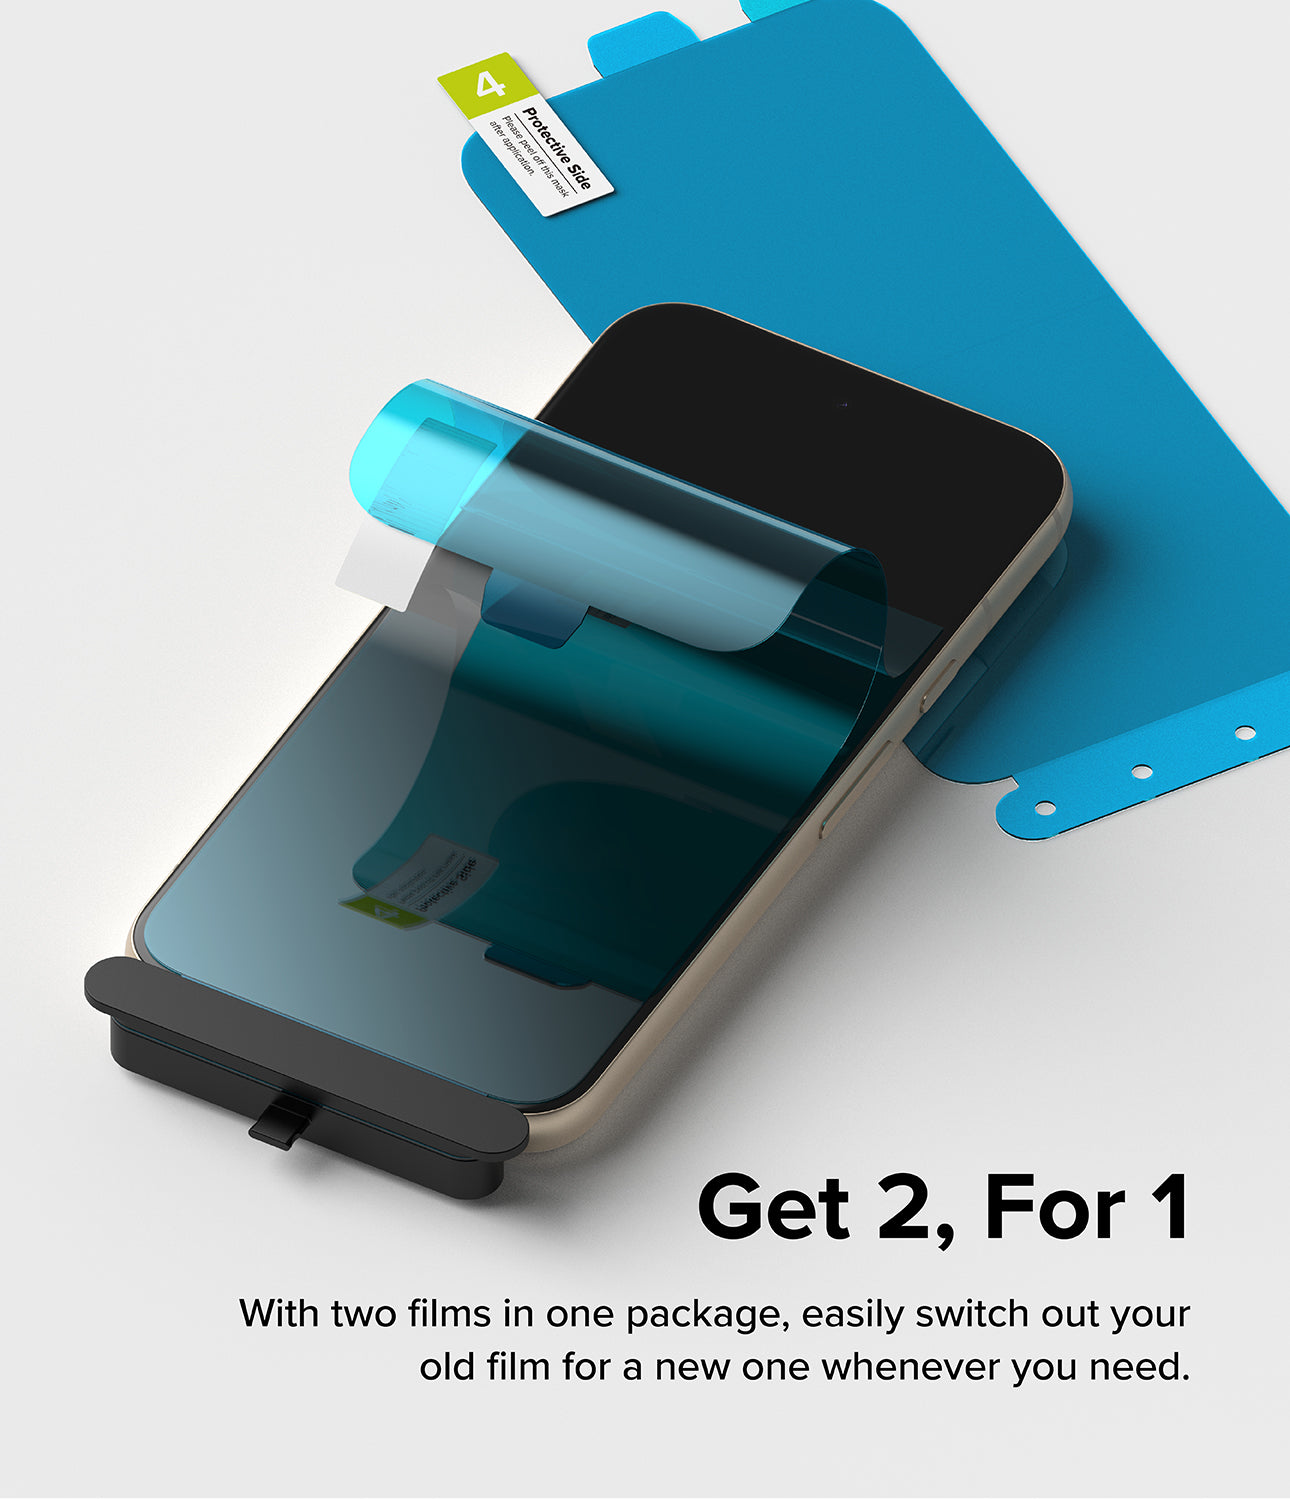 Google Pixel 8a Screen Protector | Dual Easy Film - Get 2, For 1. With two films in one package, easily switch out your old films for a new one whenever you need.